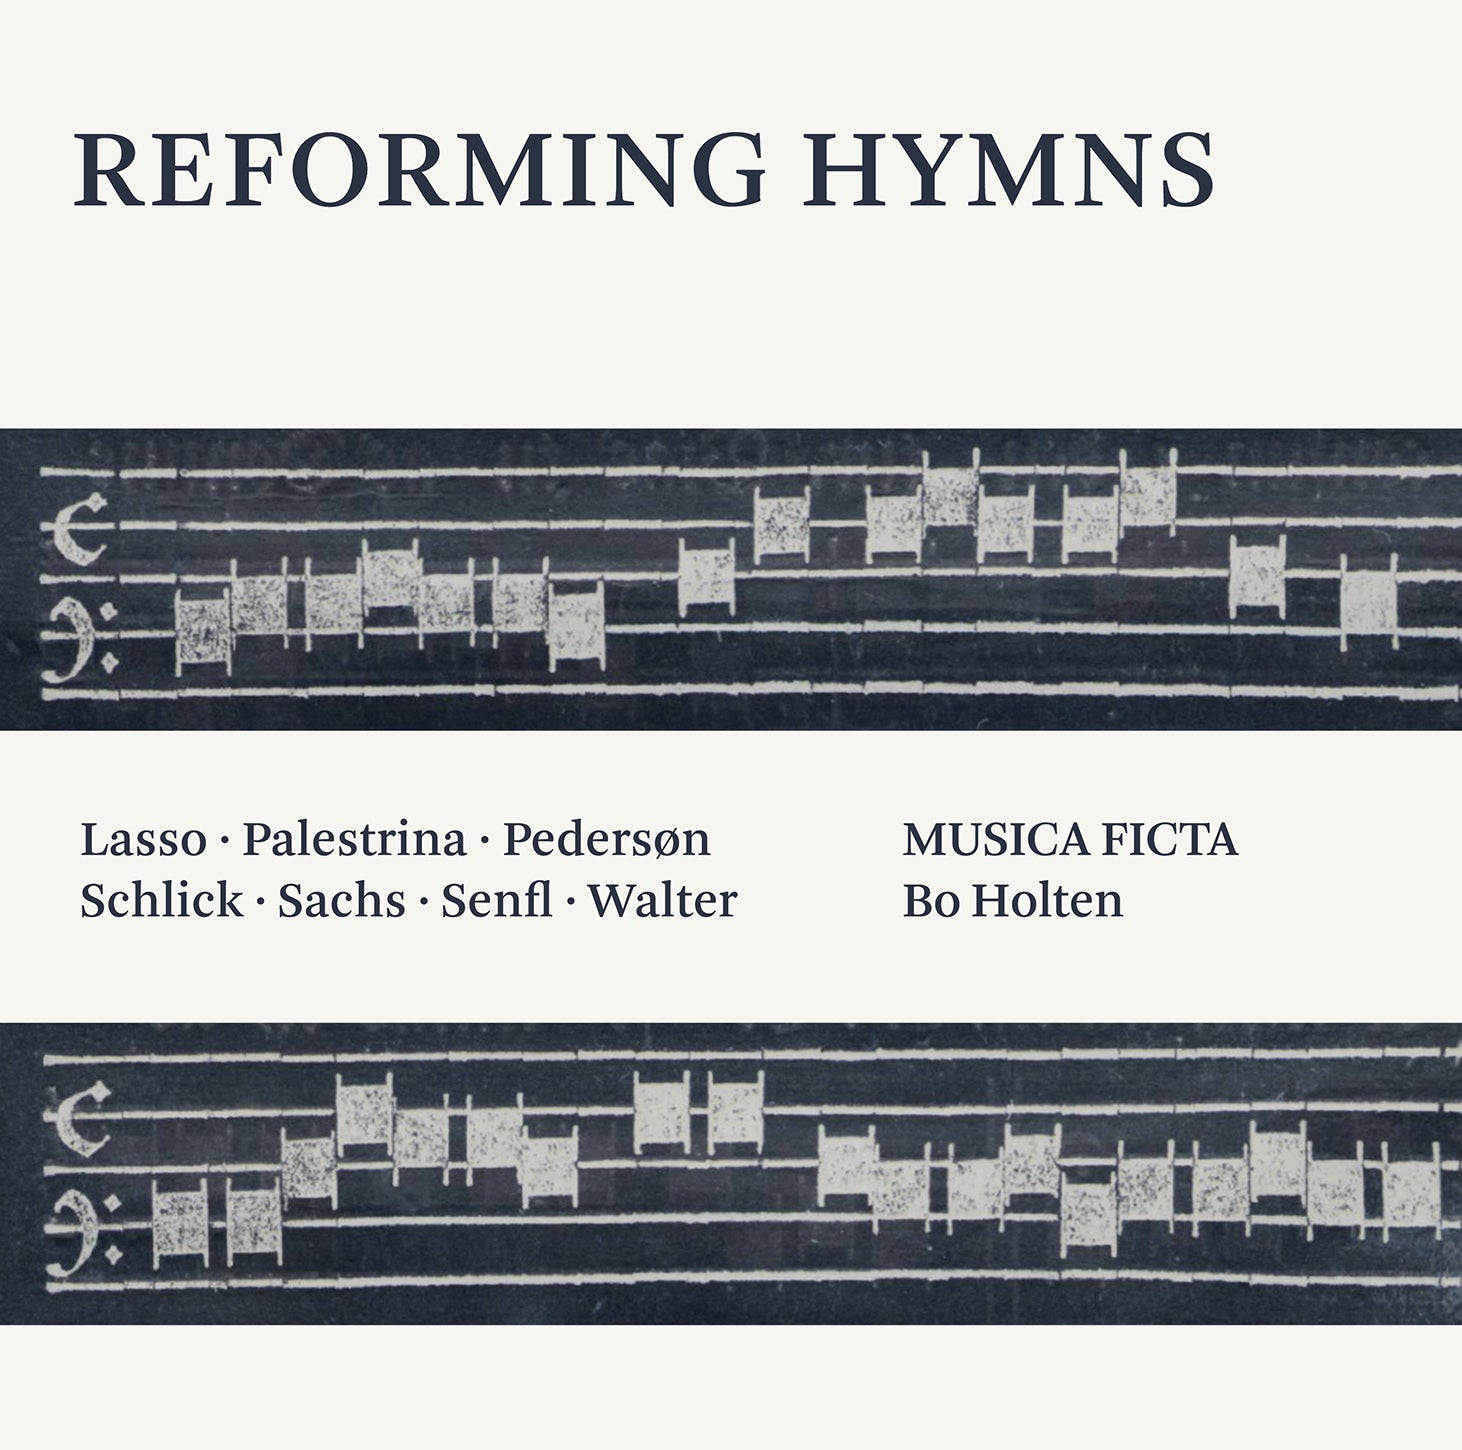 Reforming Hymns / Holten, Musica Ficta